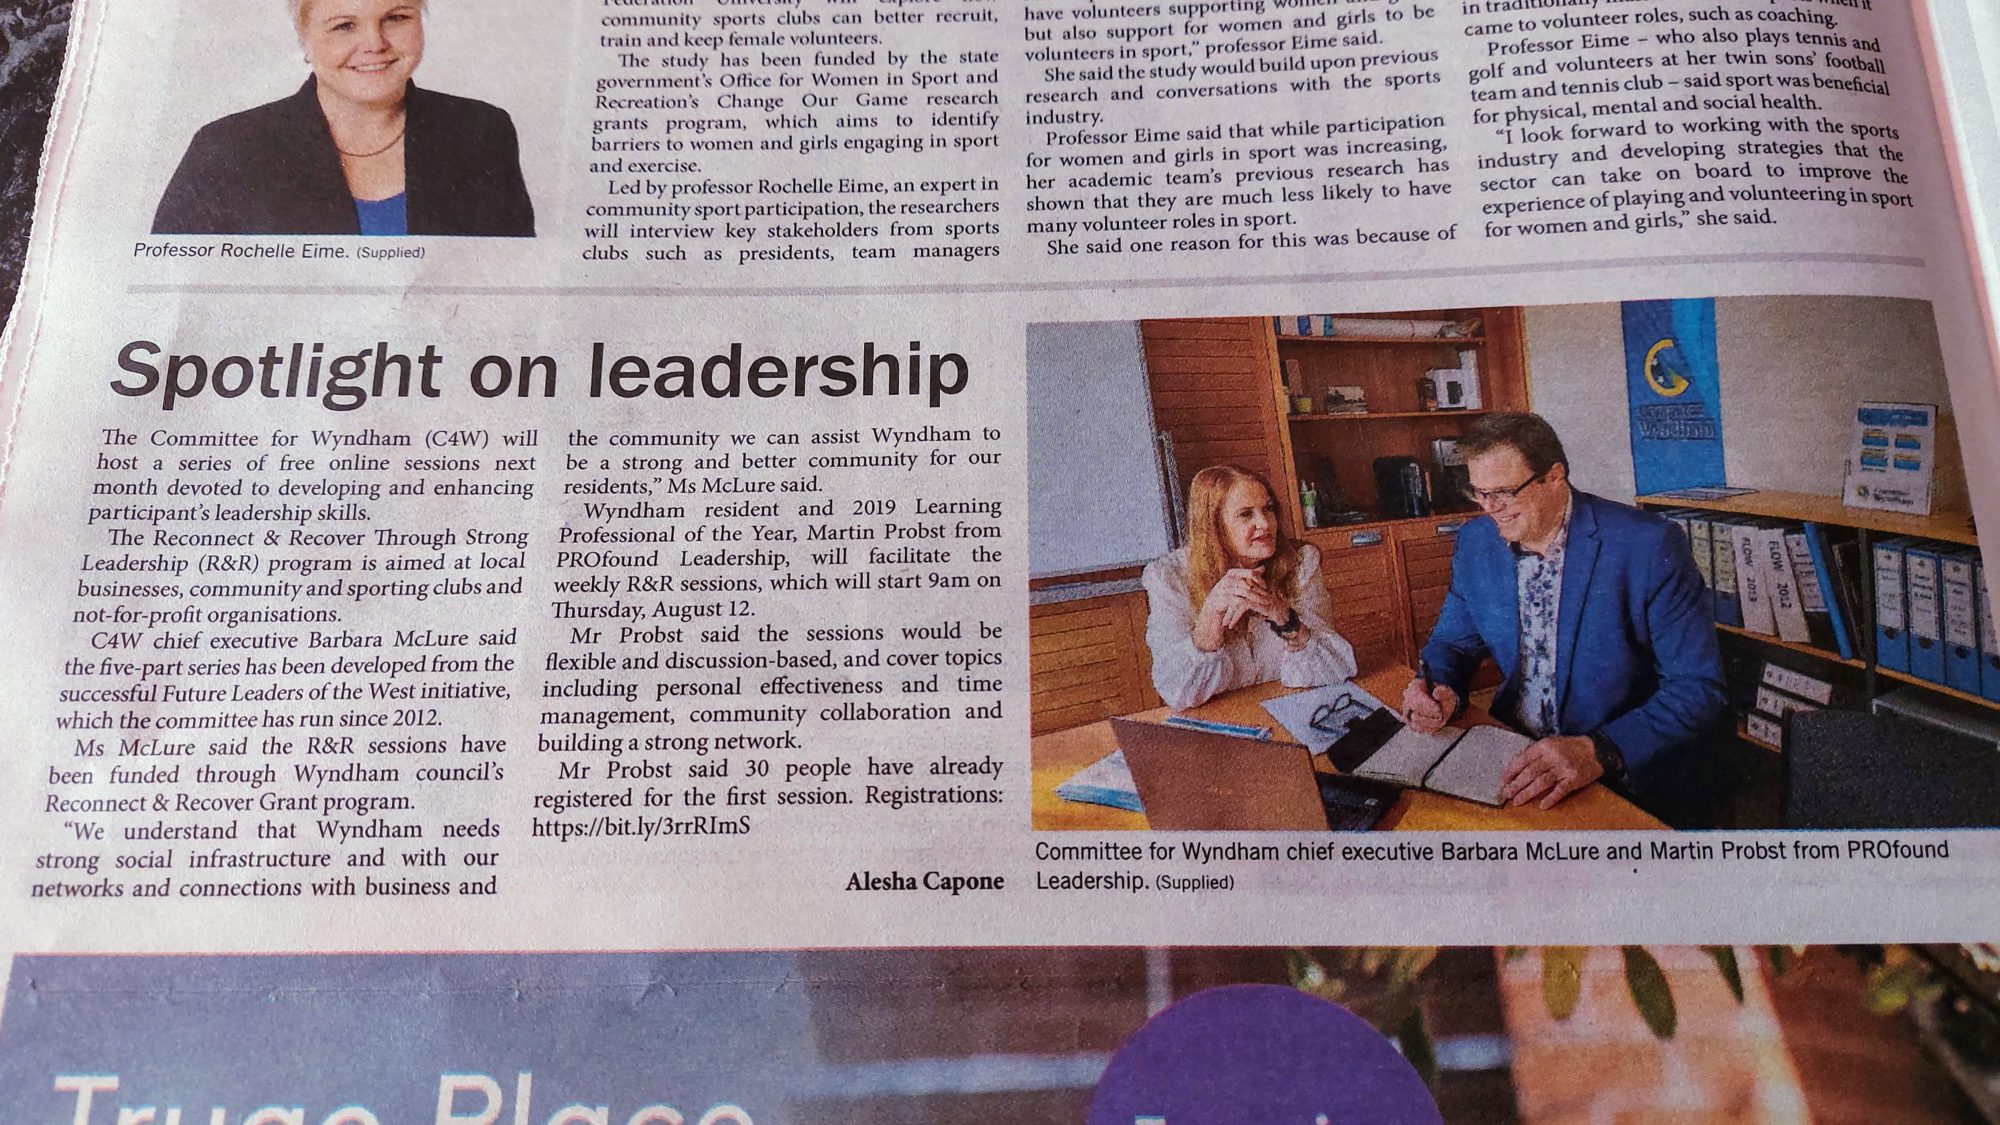 Article Committee for Wyndham - Martin Probst - Wyndham Star Weekly - Leadership Program - - Feature image